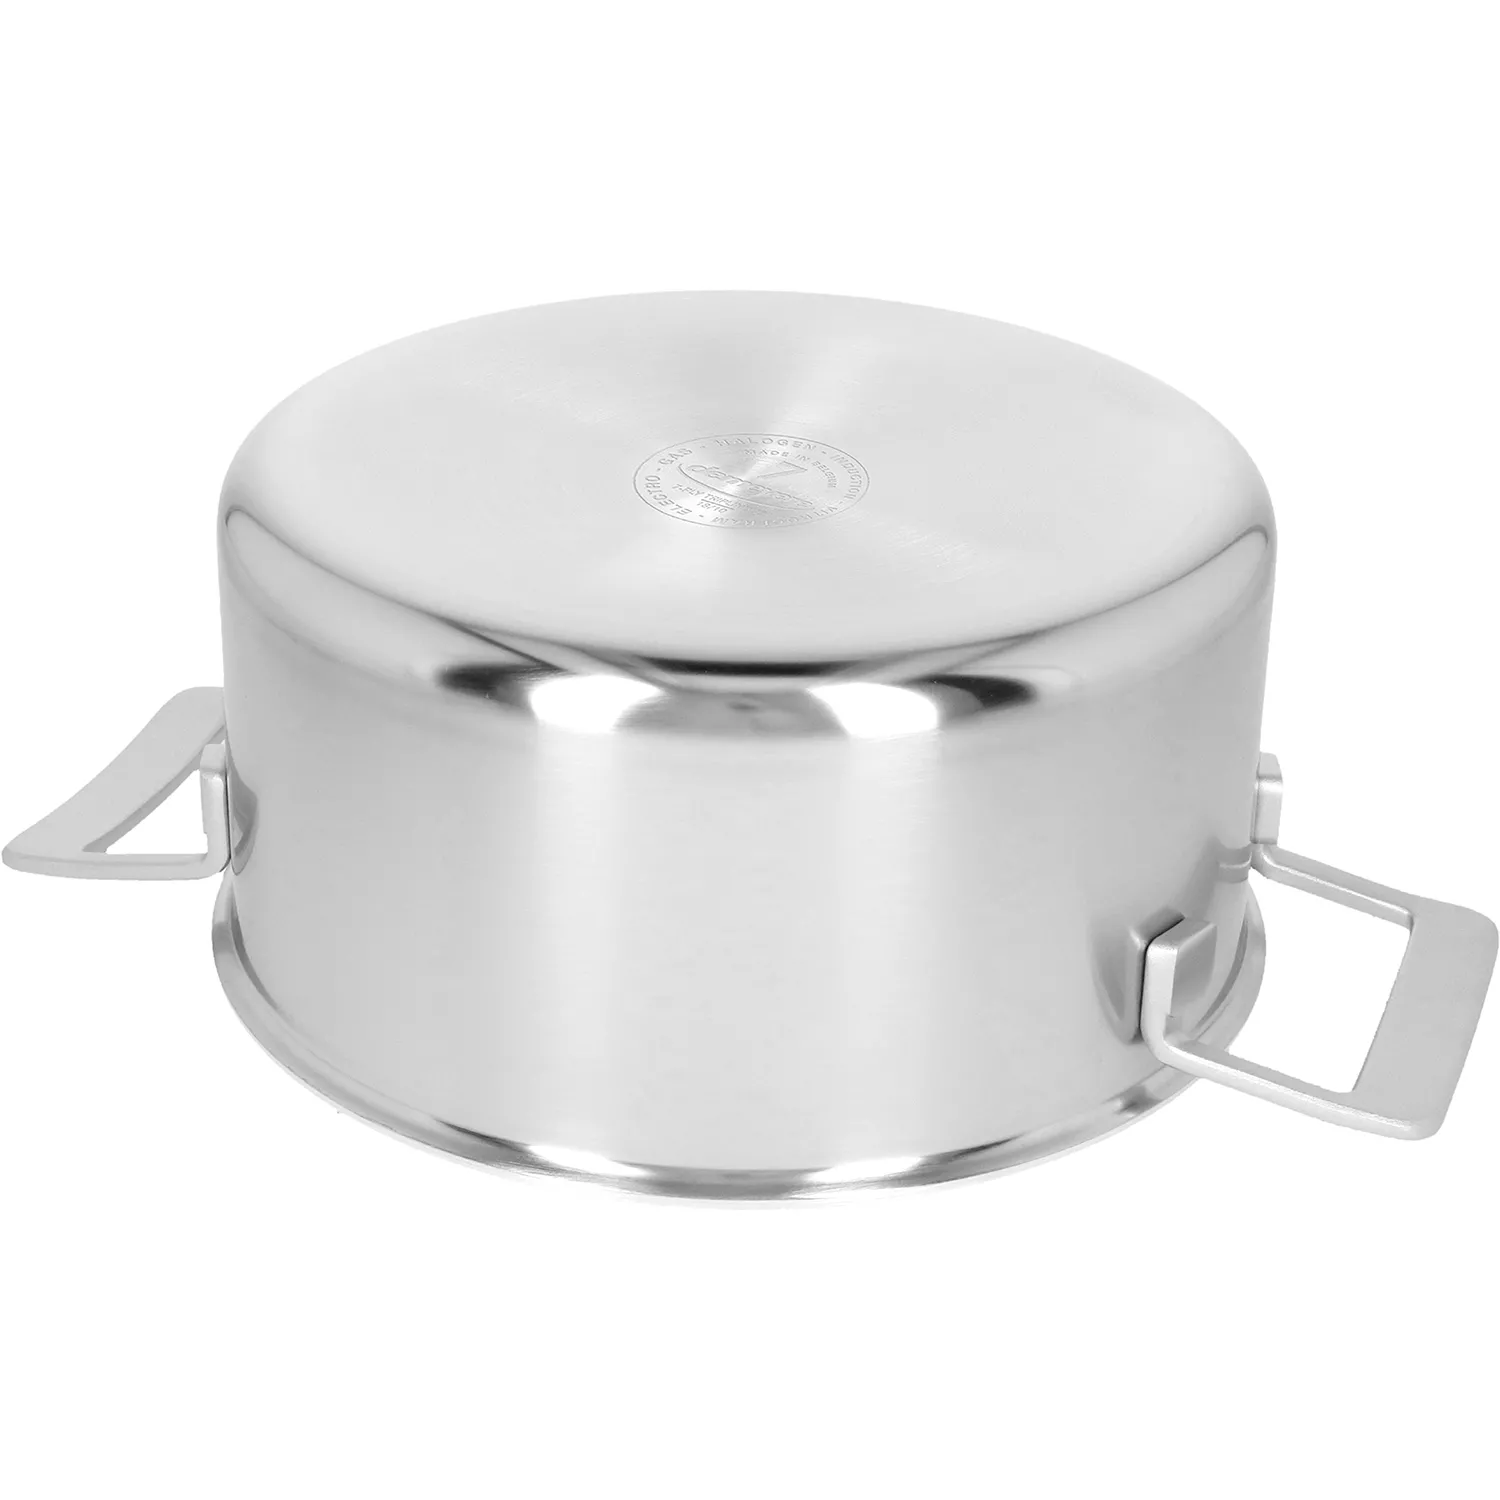 Demeyere Industry5 Stainless Steel Dutch Oven With Lid, 5.5 Qt.